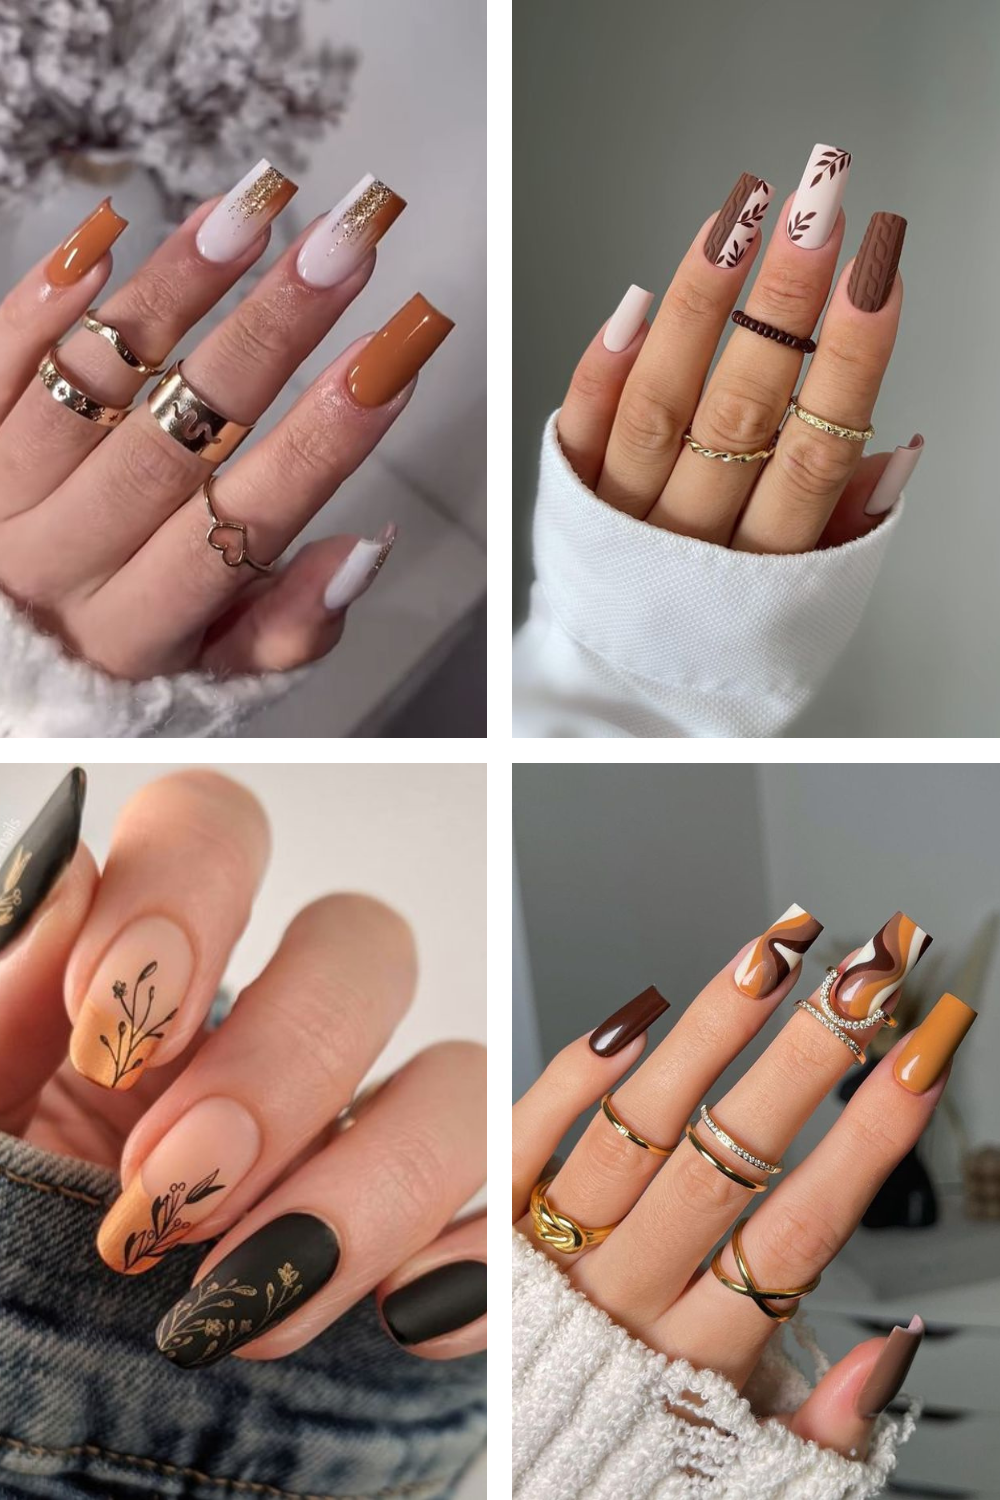 25 Stunning September Nails That Will Take Your Breath Away this Season!